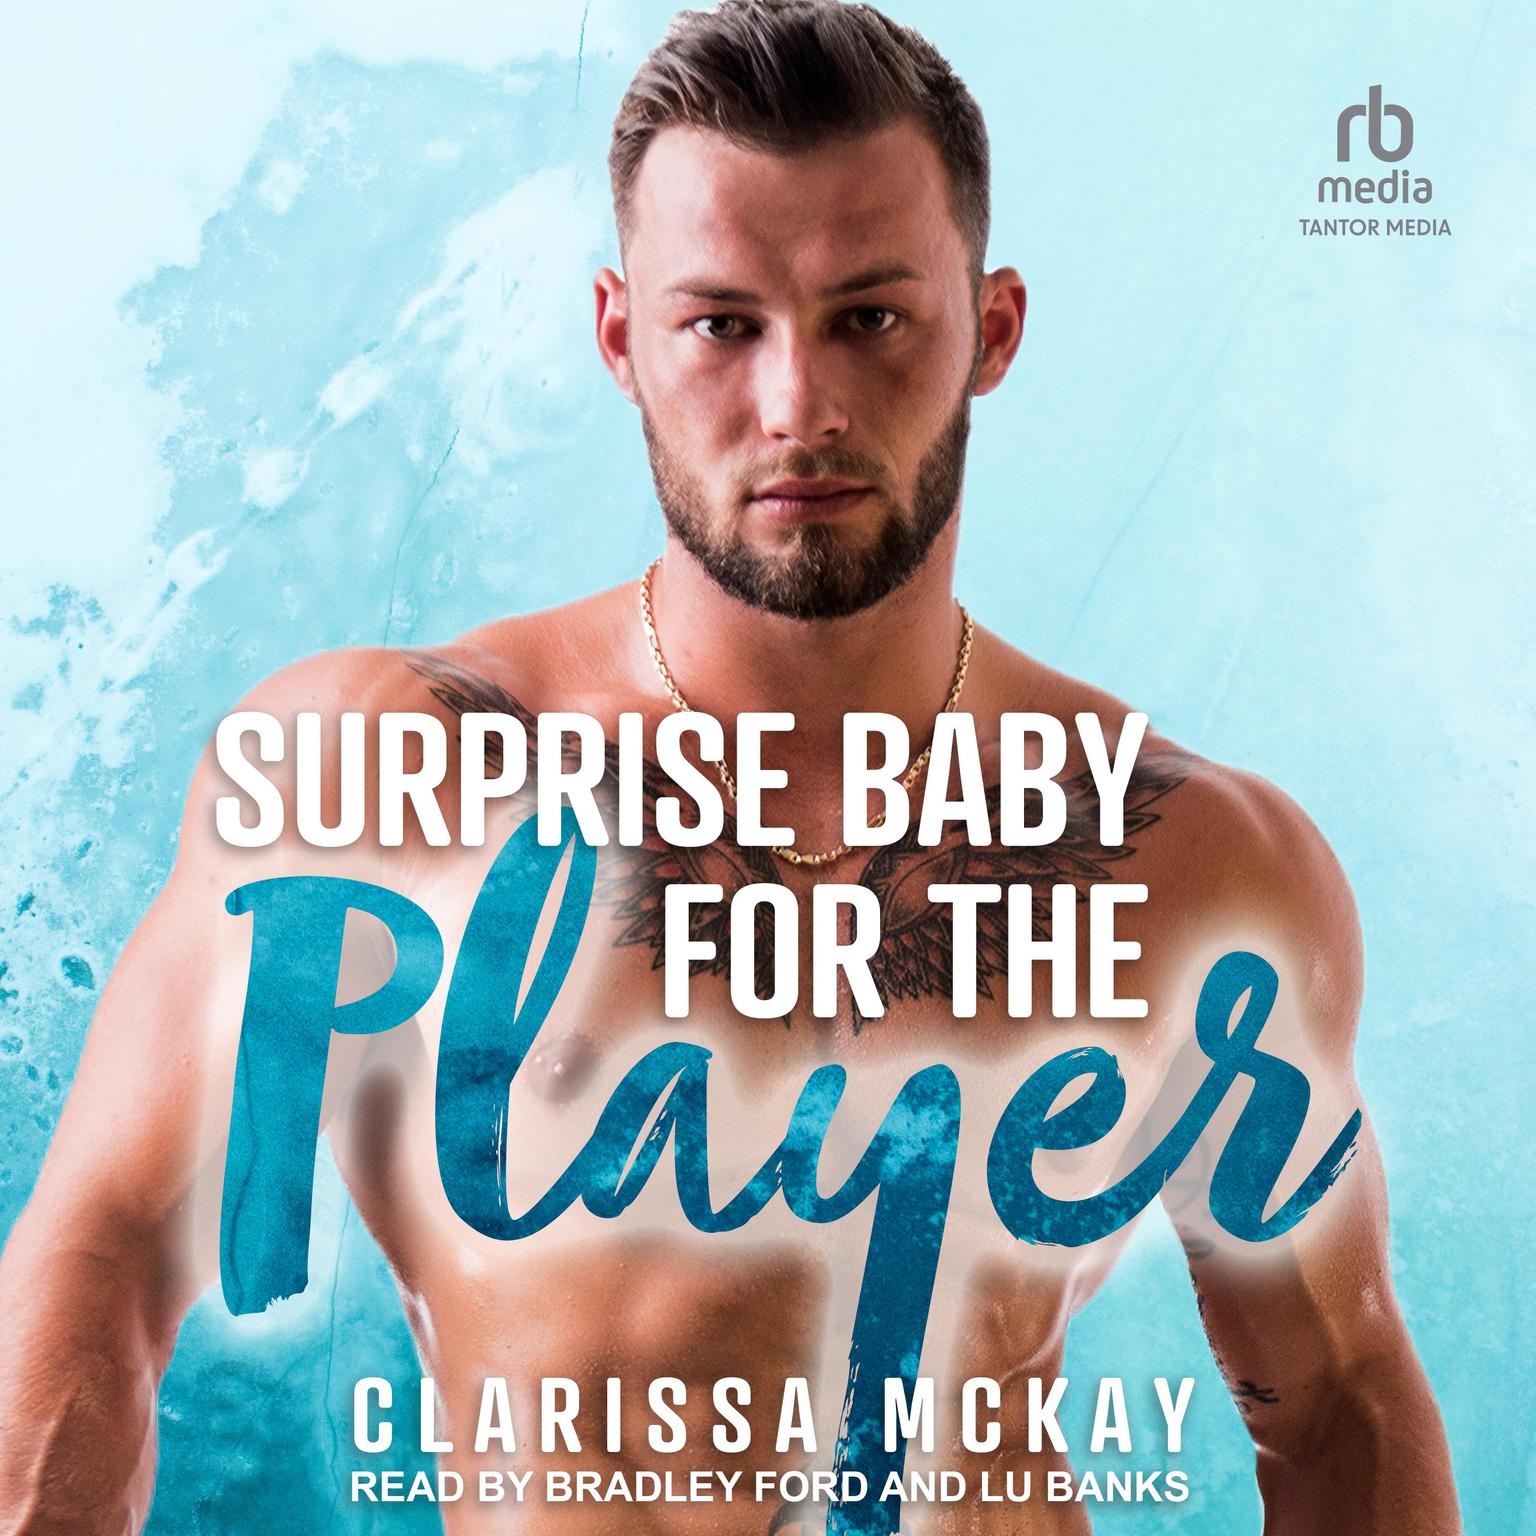 Surprise Baby for the Player Audiobook, by Clarissa McKay